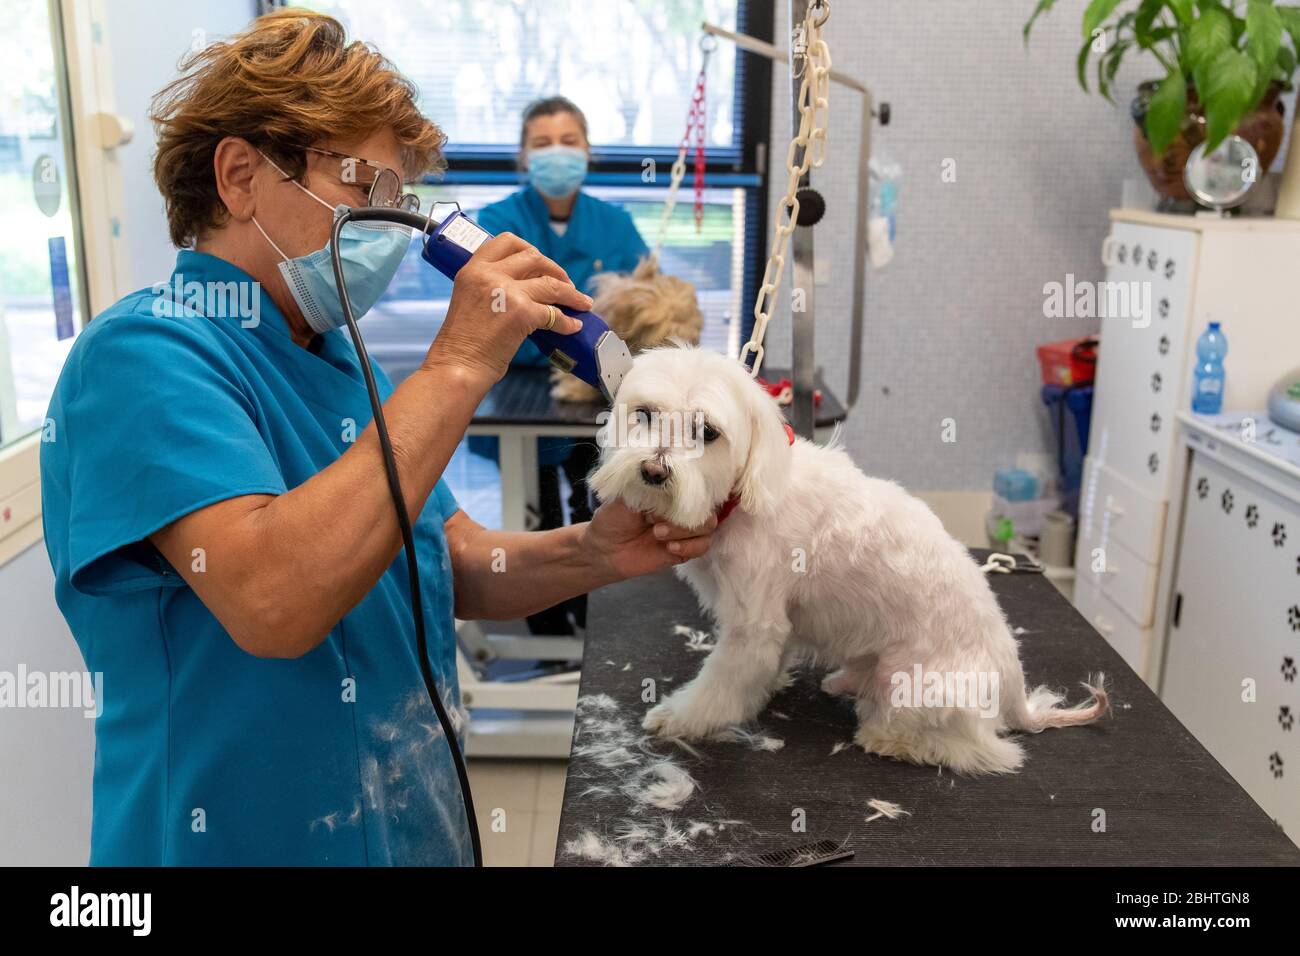 Ferrara, Italy. 27 April, 2020.  Dog grooming shops reopen after the lockout period due to the covid19 pandemic in Ferrara, Italy.   Credit: Filippo Rubin / Alamy Live News Stock Photo